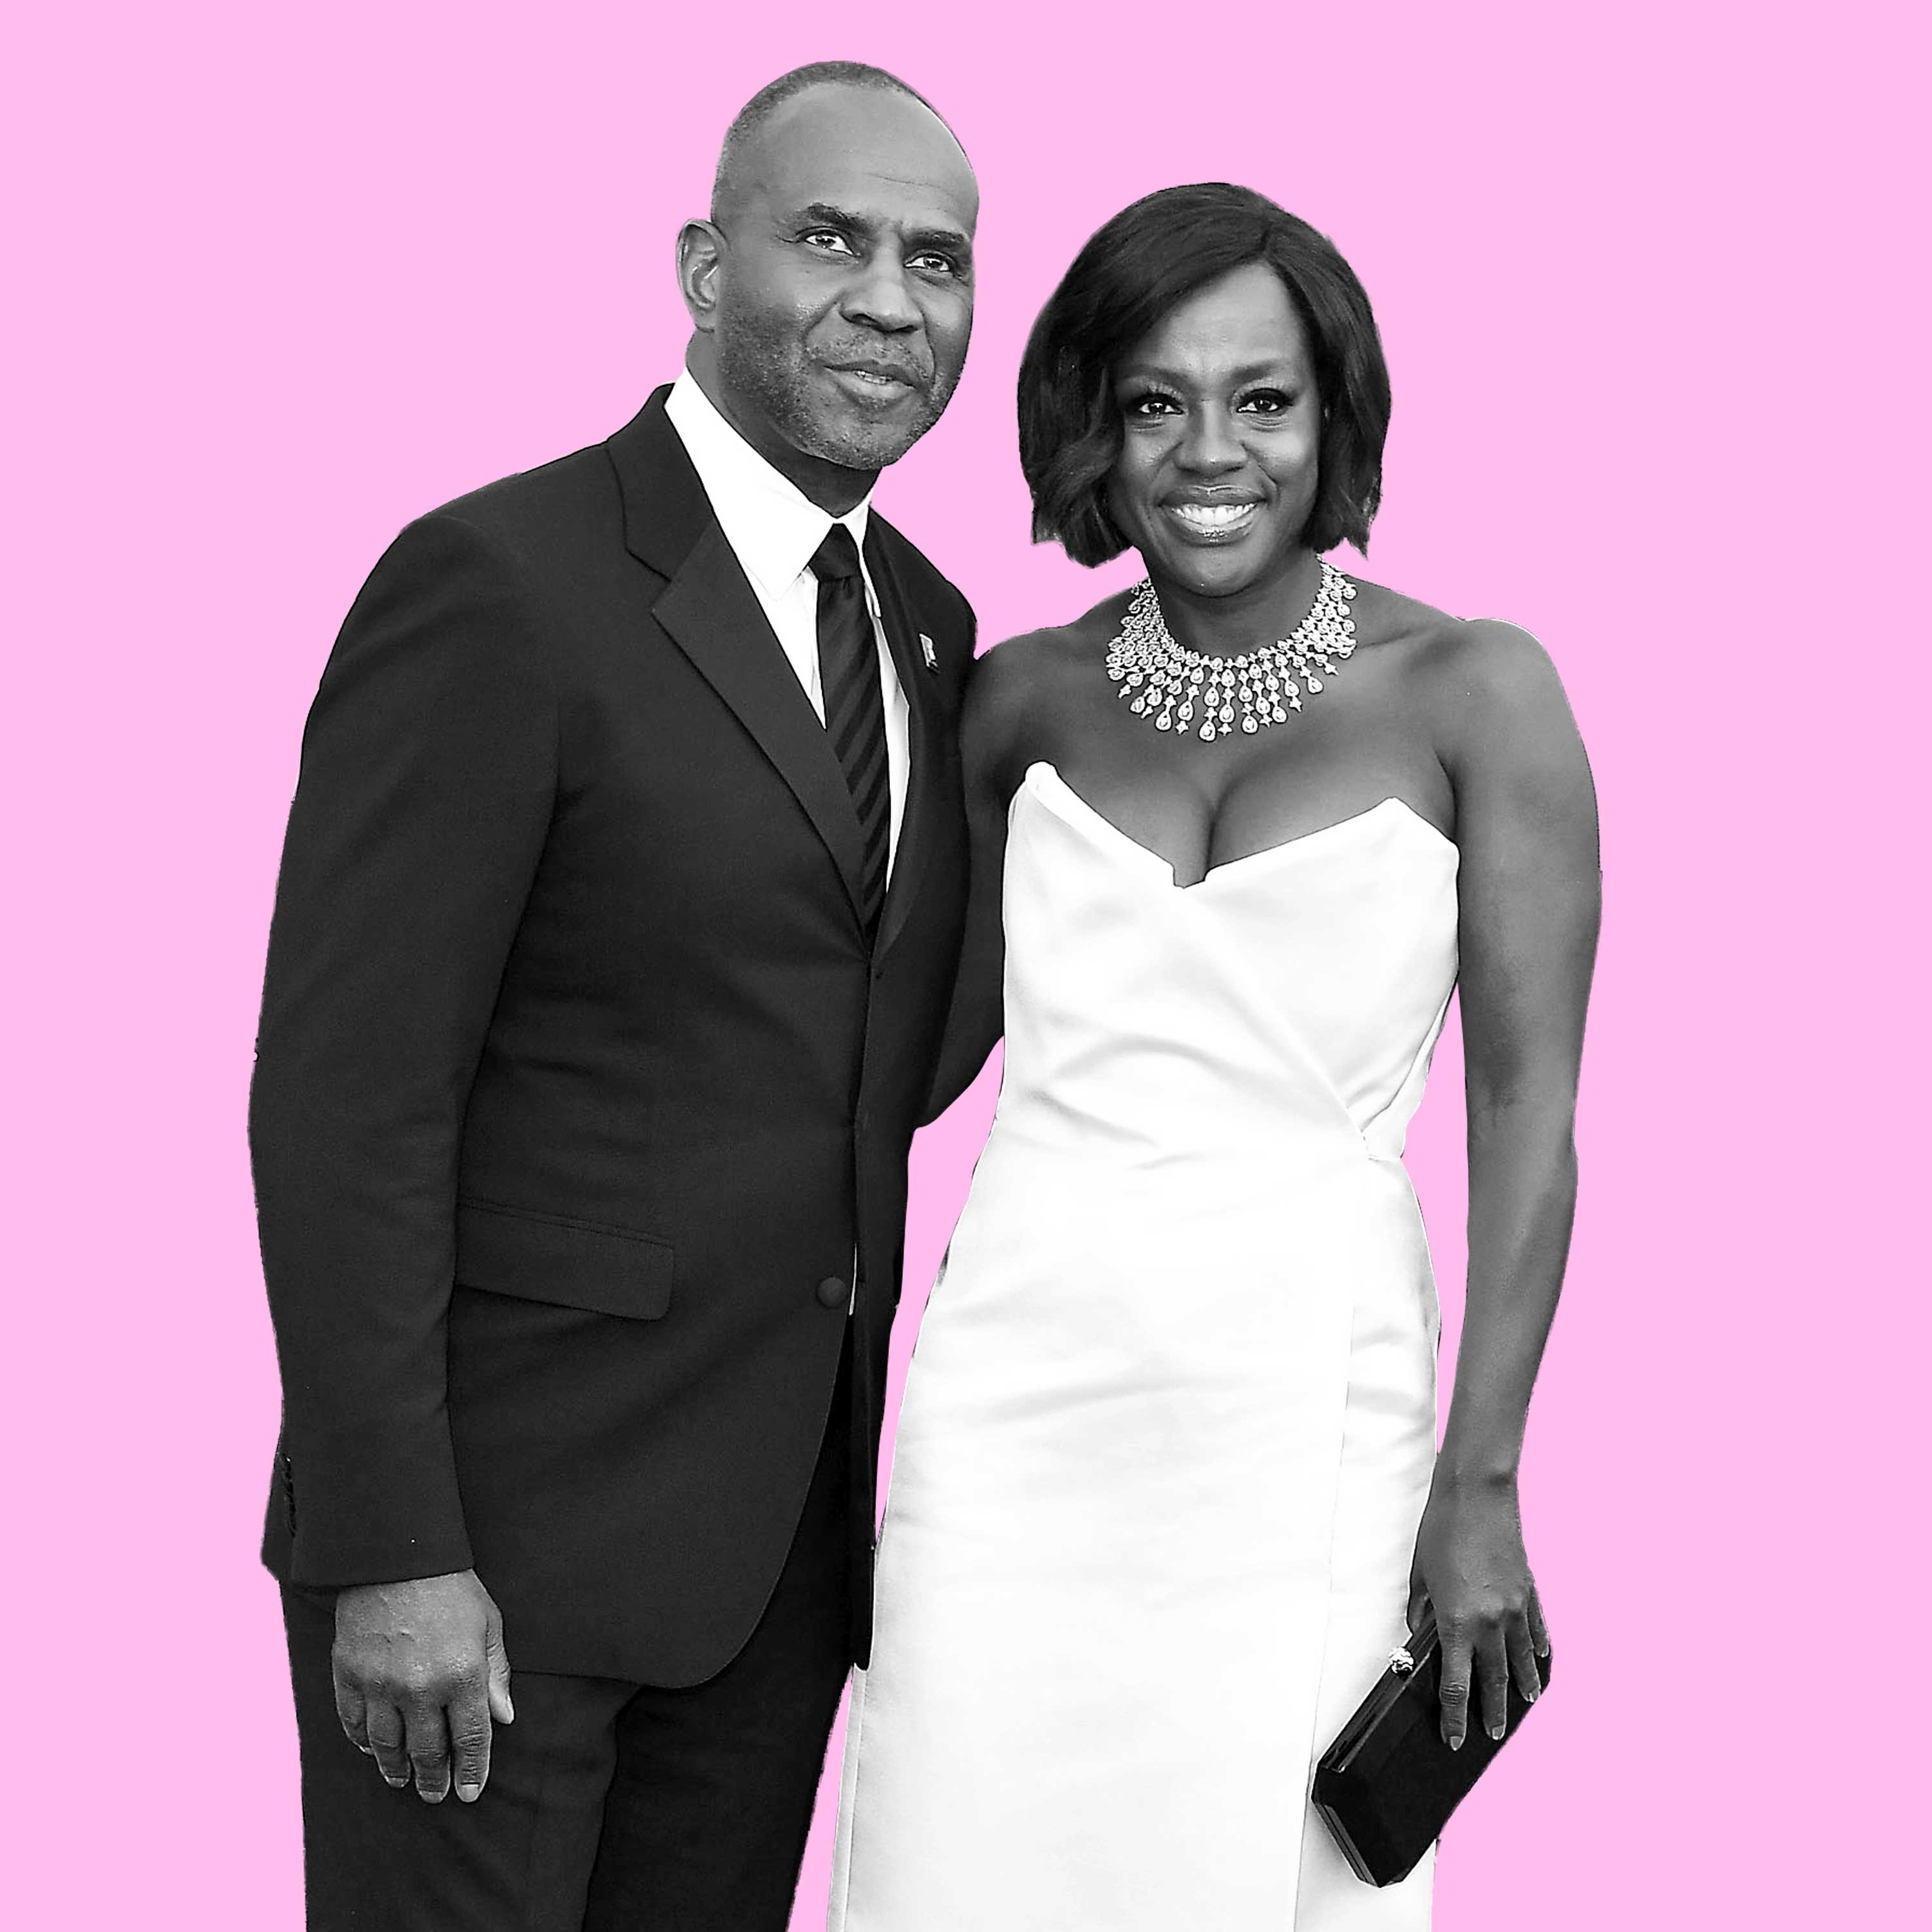 Viola Davis On When A Marriage Really Begins (Hint: It's Not At The Altar)
